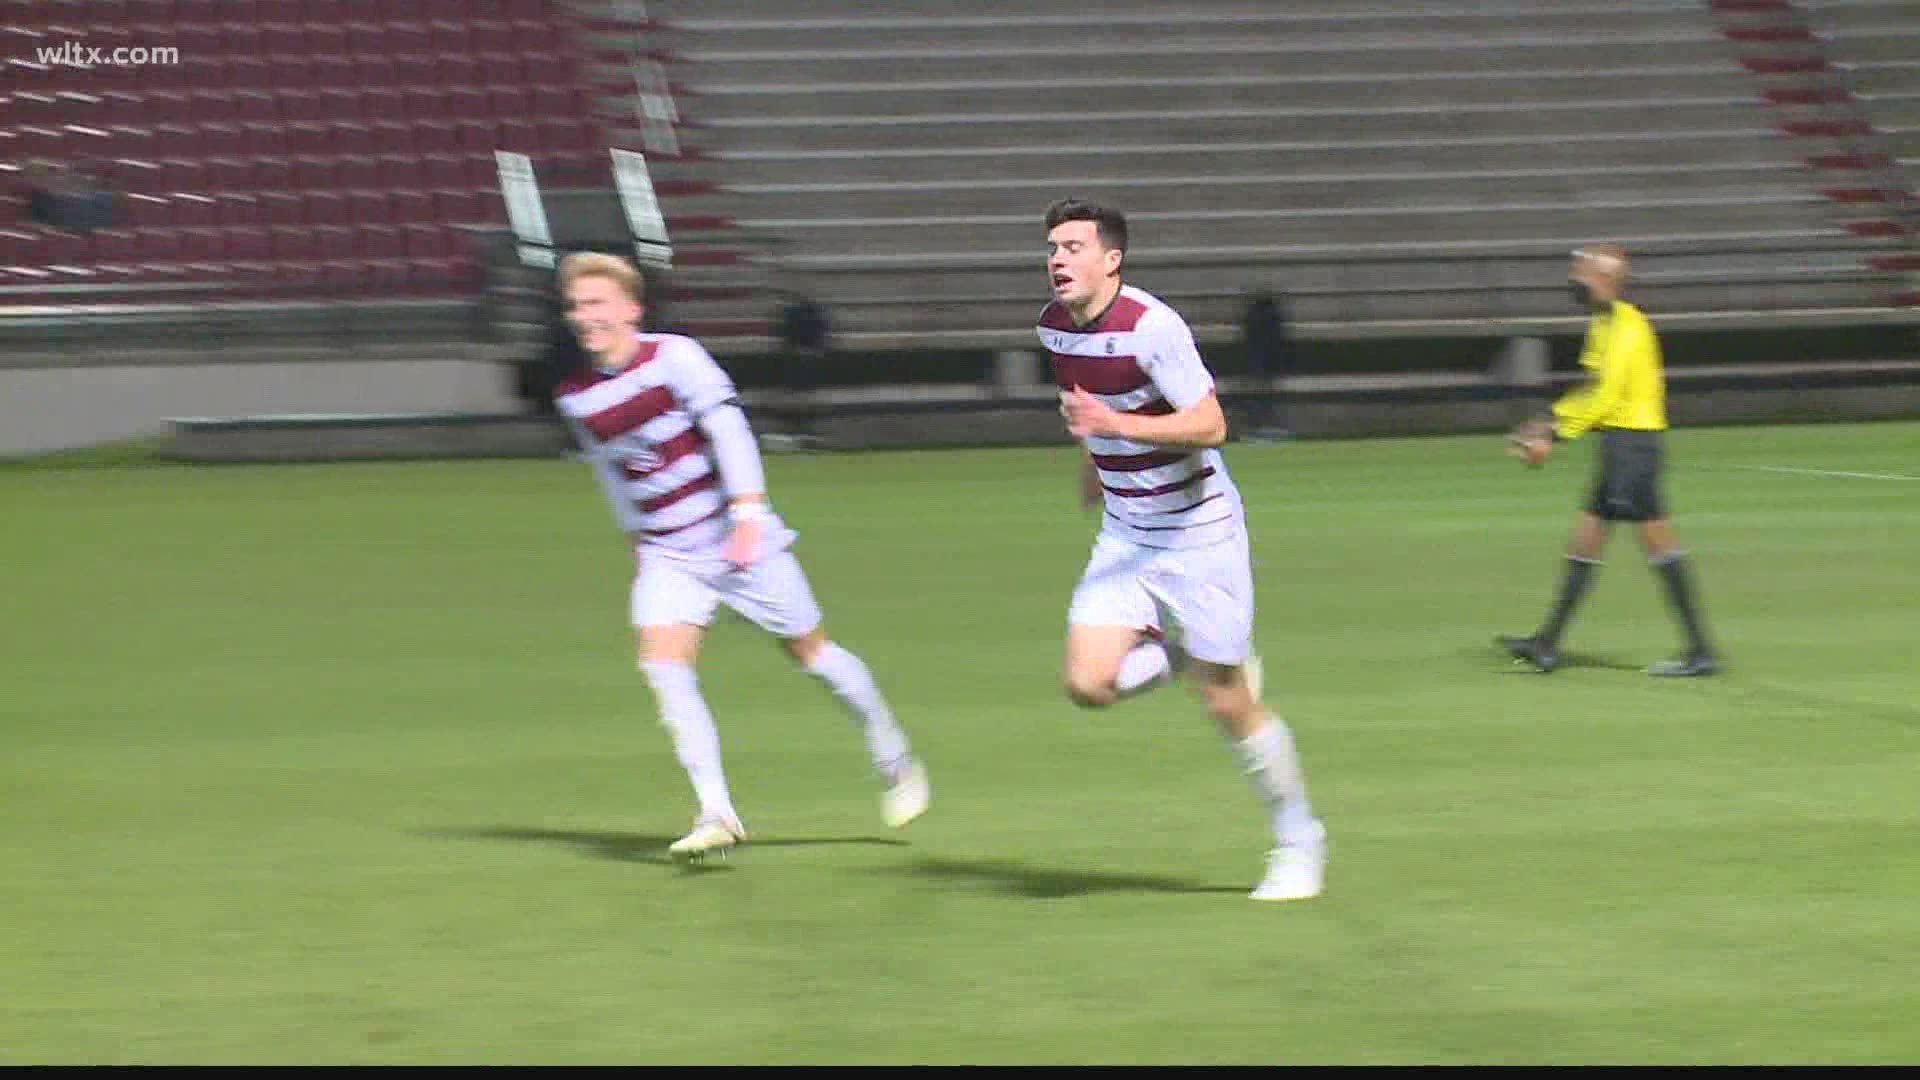 The South Carolina men's soccer team pulled out a hard-fought 2-1 victory over USC Upstate Wednesday night at Stone Stadium.